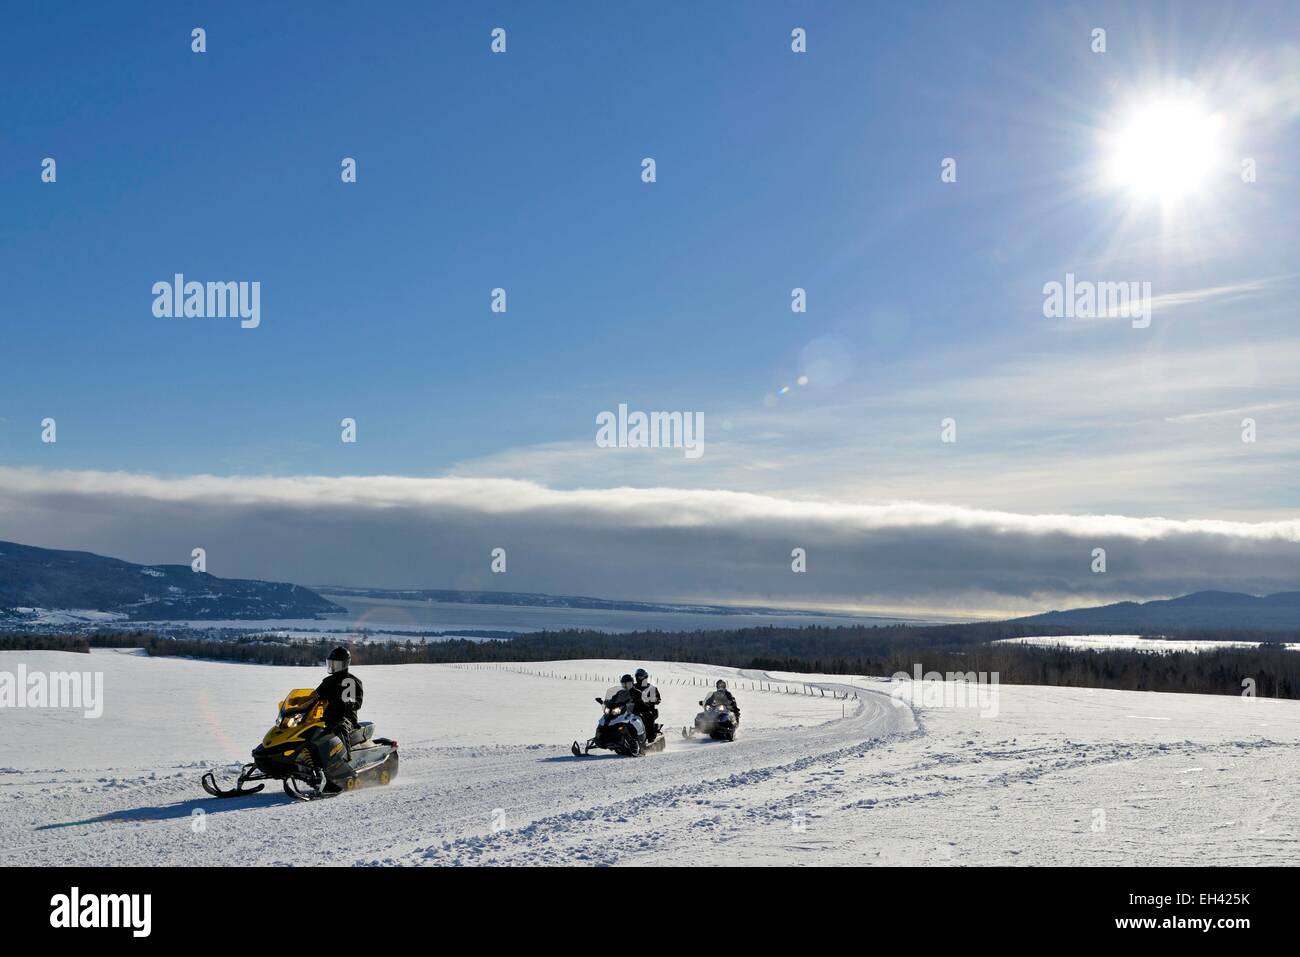 Canada, Quebec province, region of Charlevoix, Baie Saint Paul, snowmobiles in single file with the river background Saint Laurent Stock Photo